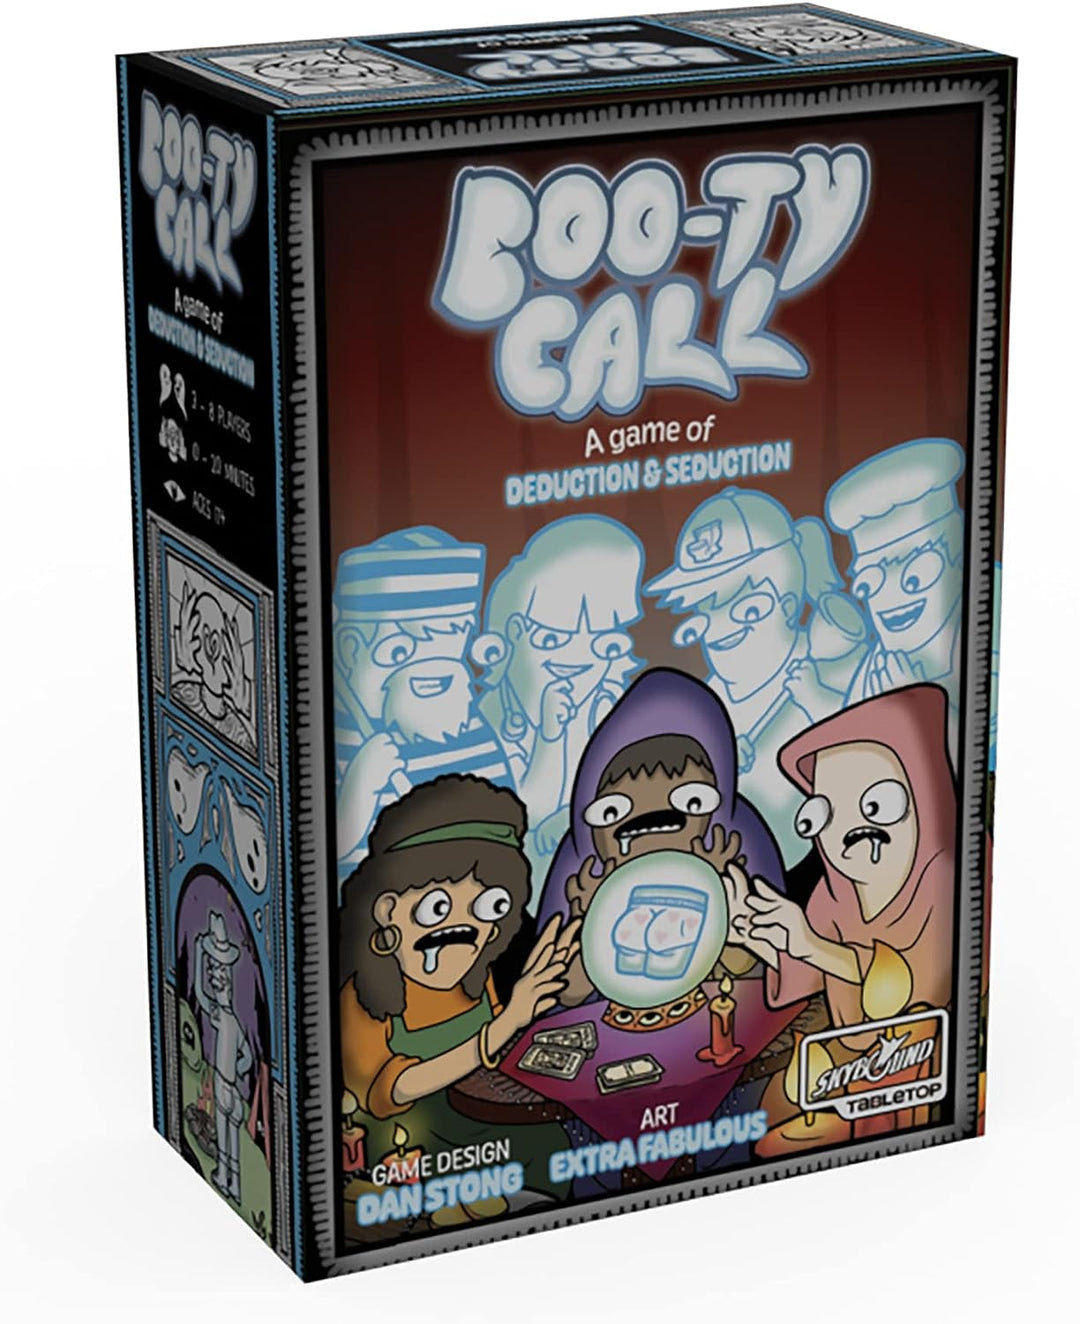 Boo-ty Call - A Game of Deduction & Seduction Card Game